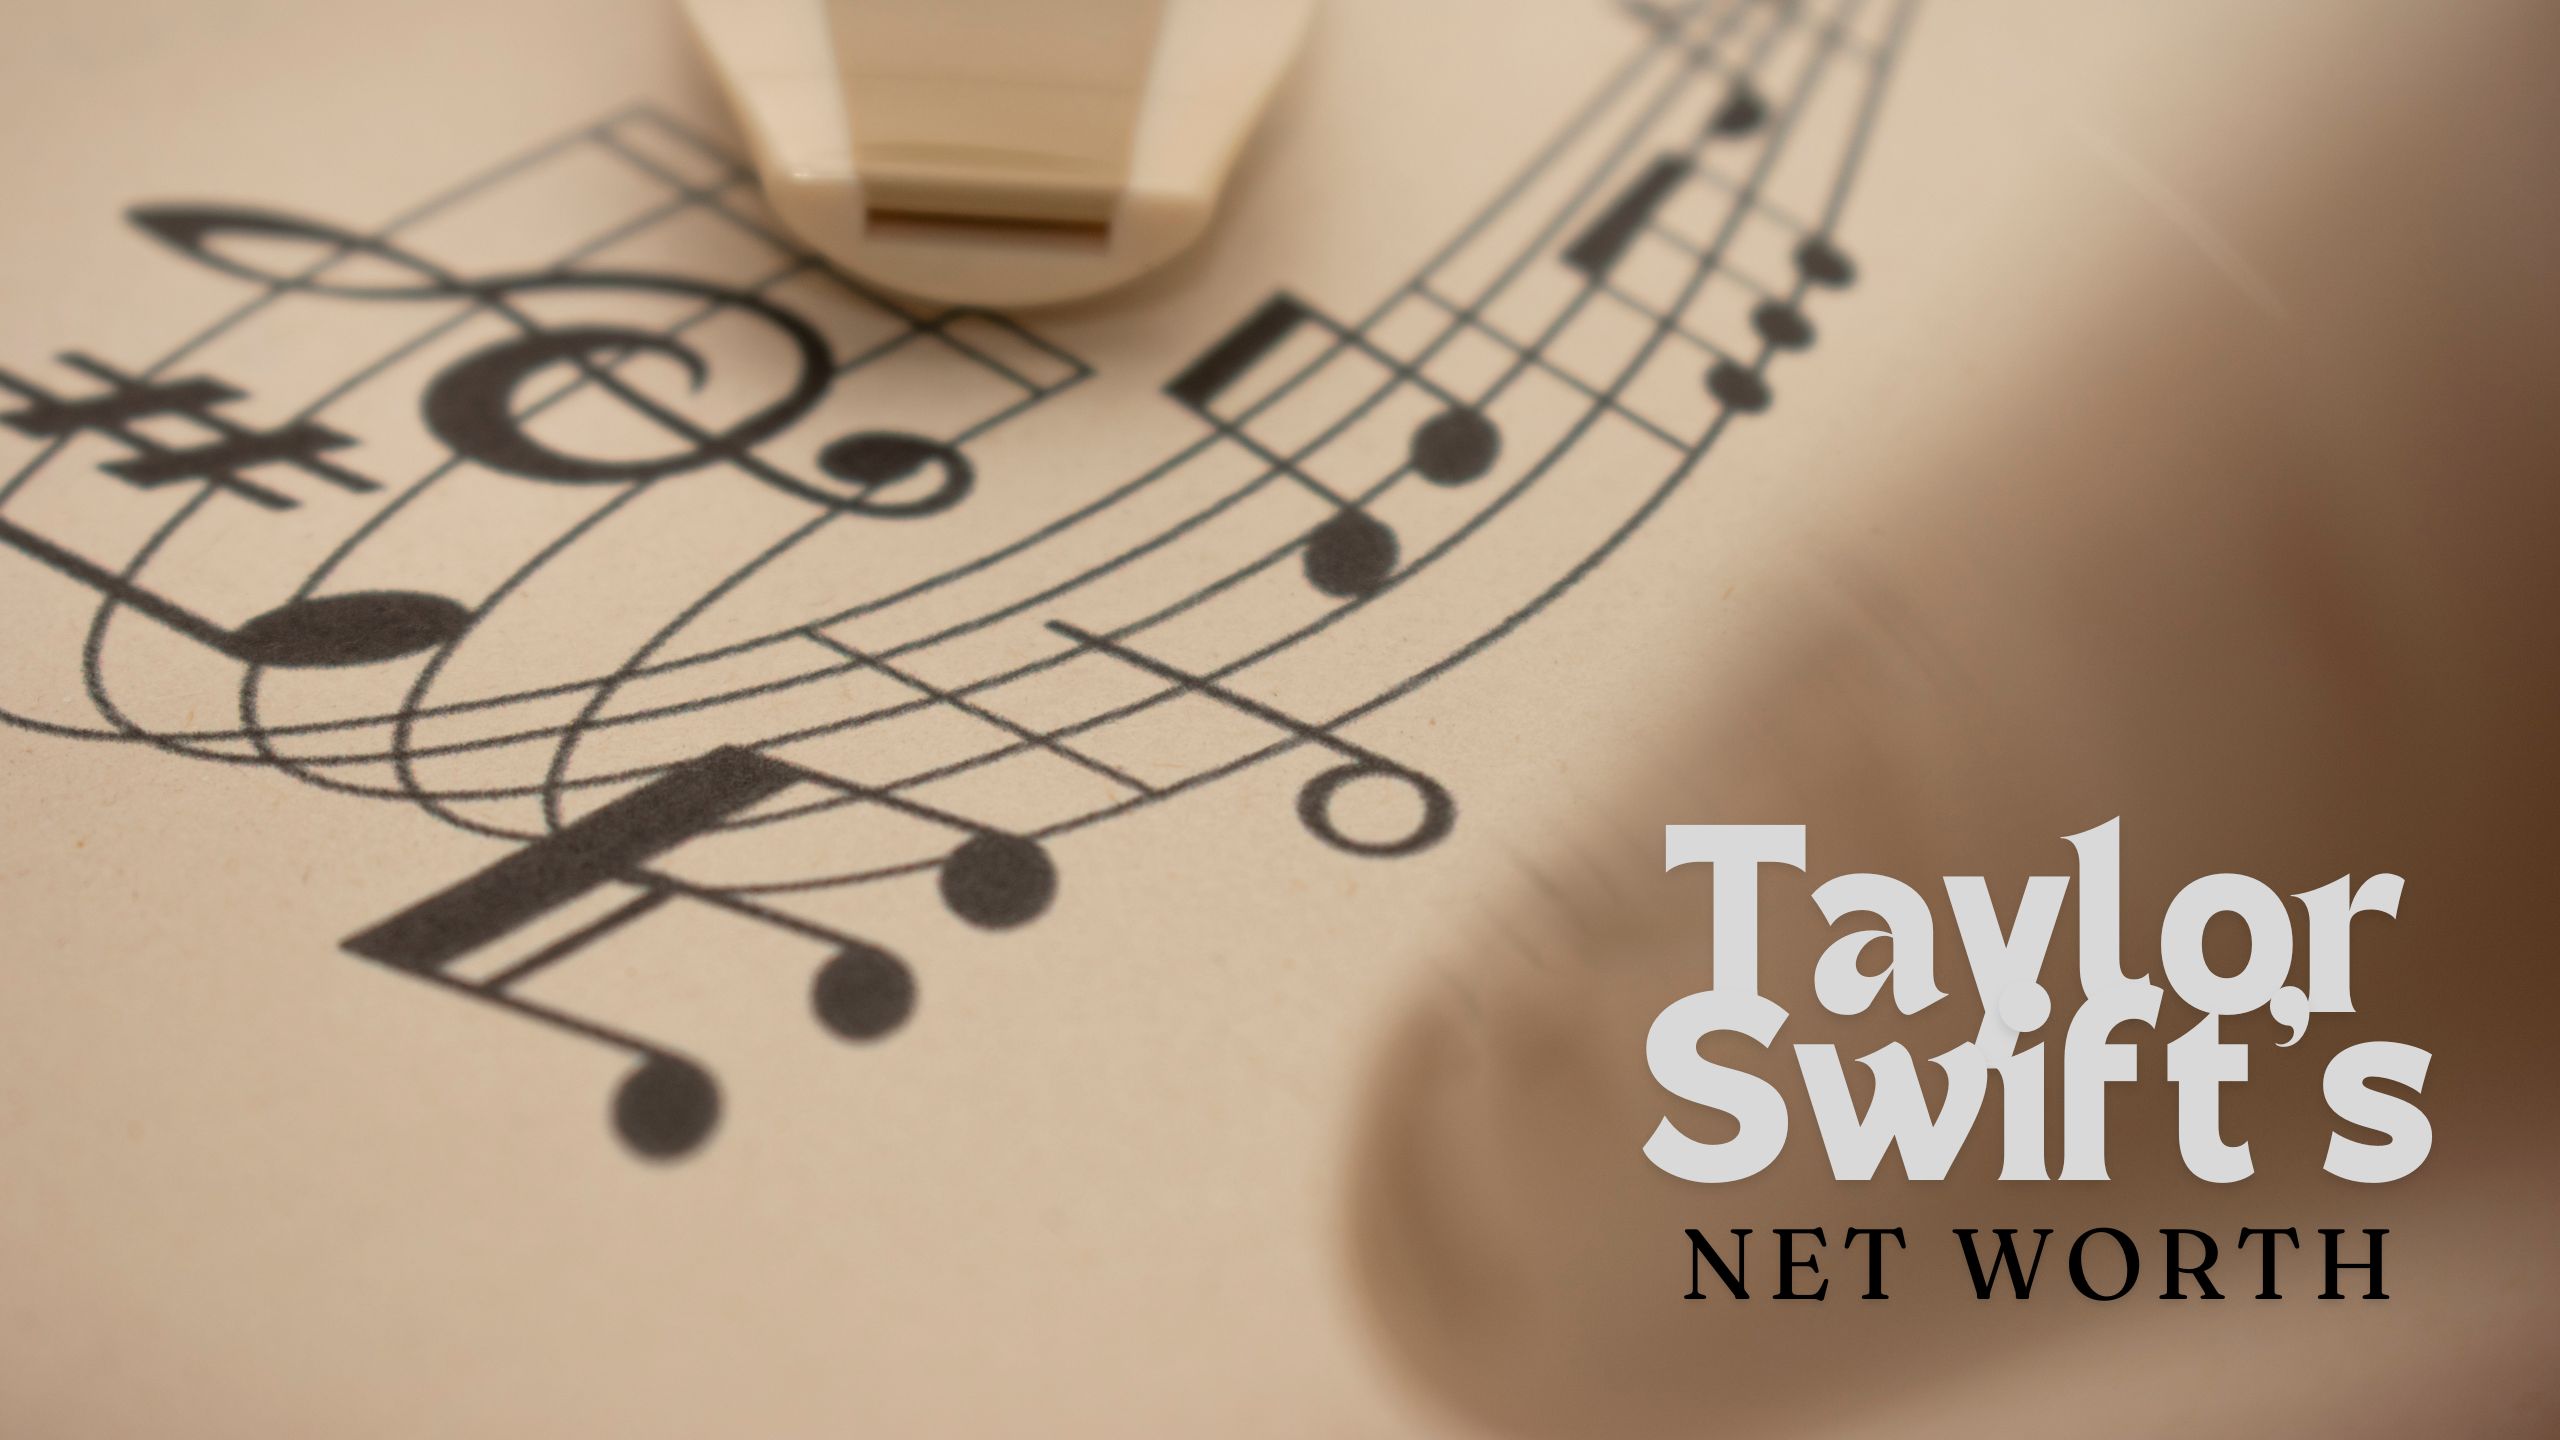 What is Taylor Swift’s net worth and is she the Richest Musicians in the world?